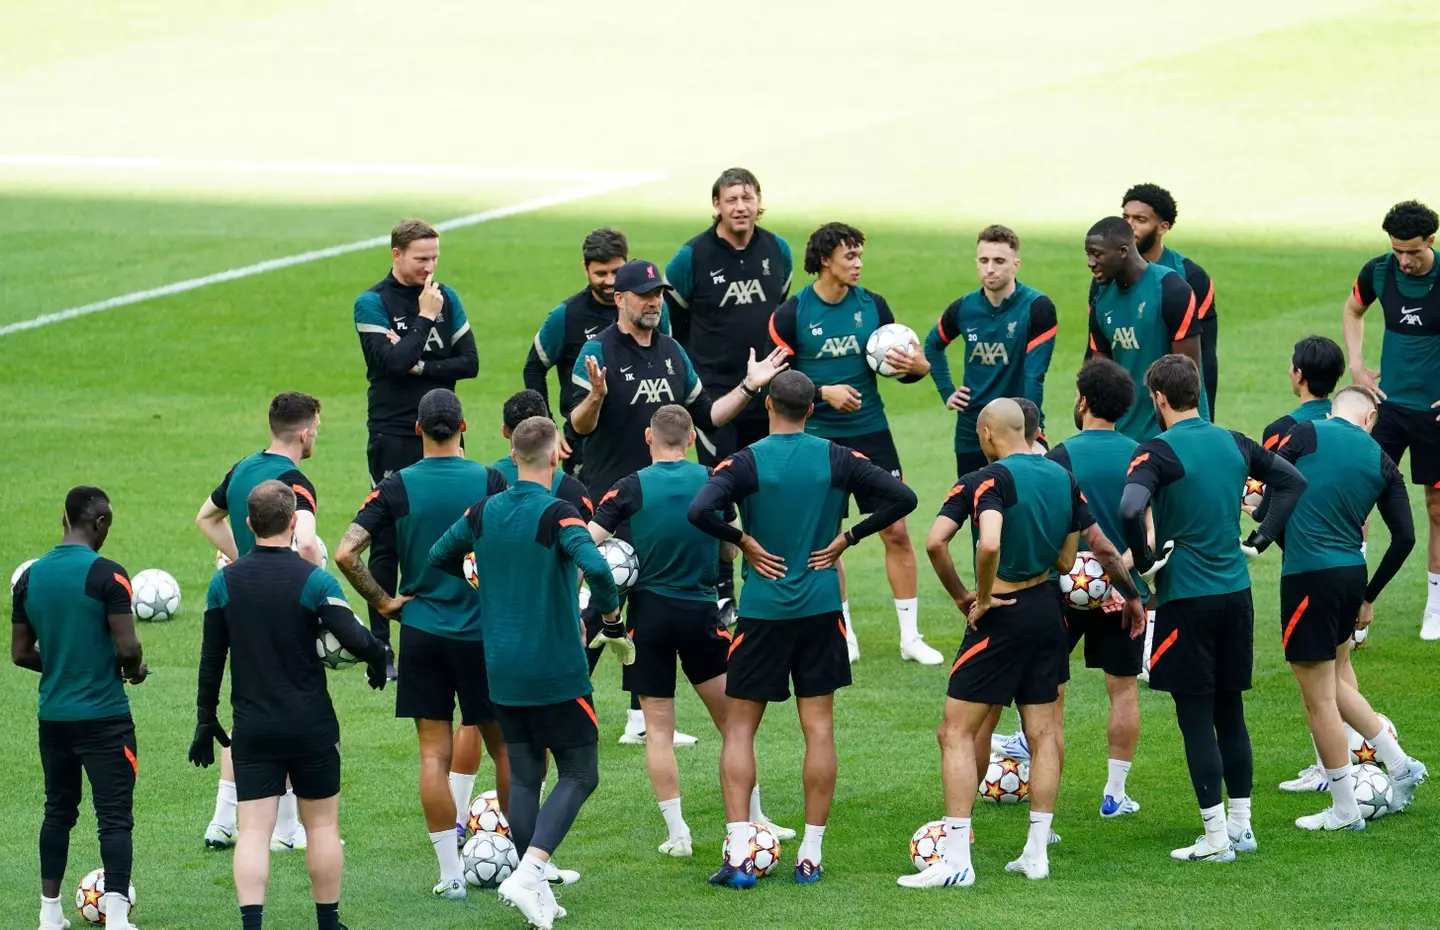 Liverpool players training at the stadium ahead of the final. Image: PA Images